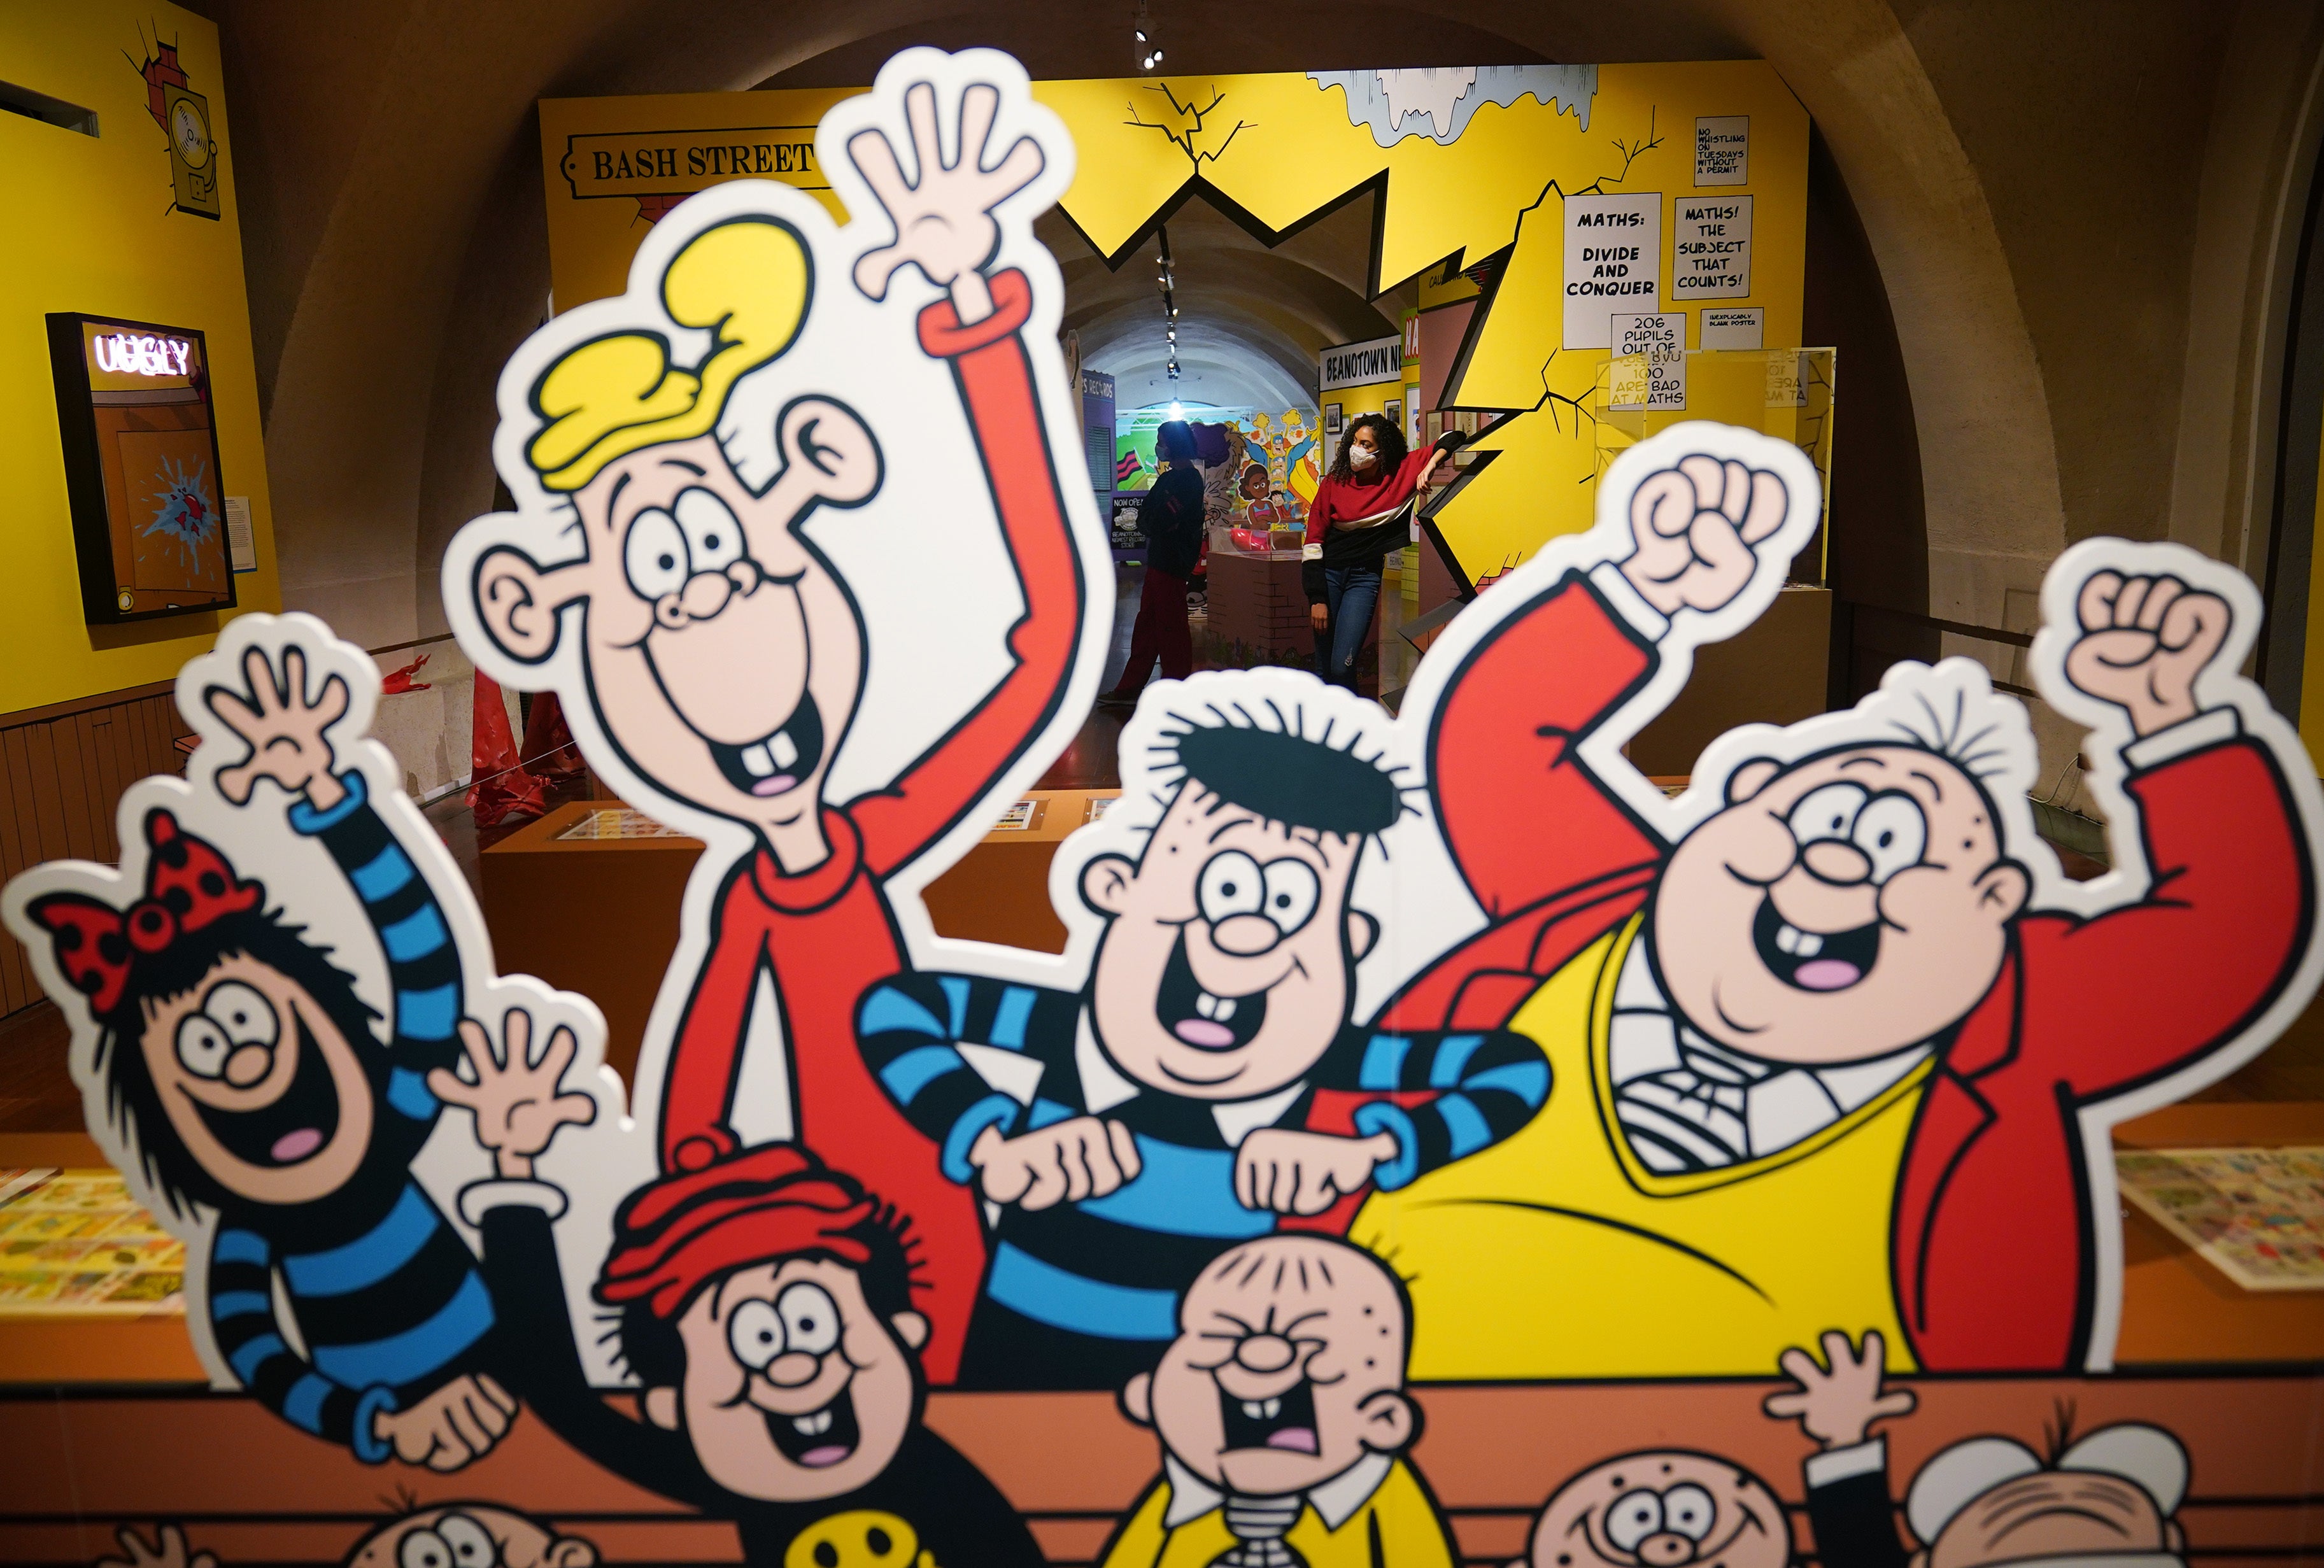 ‘The Beano’ has been running for 83 years